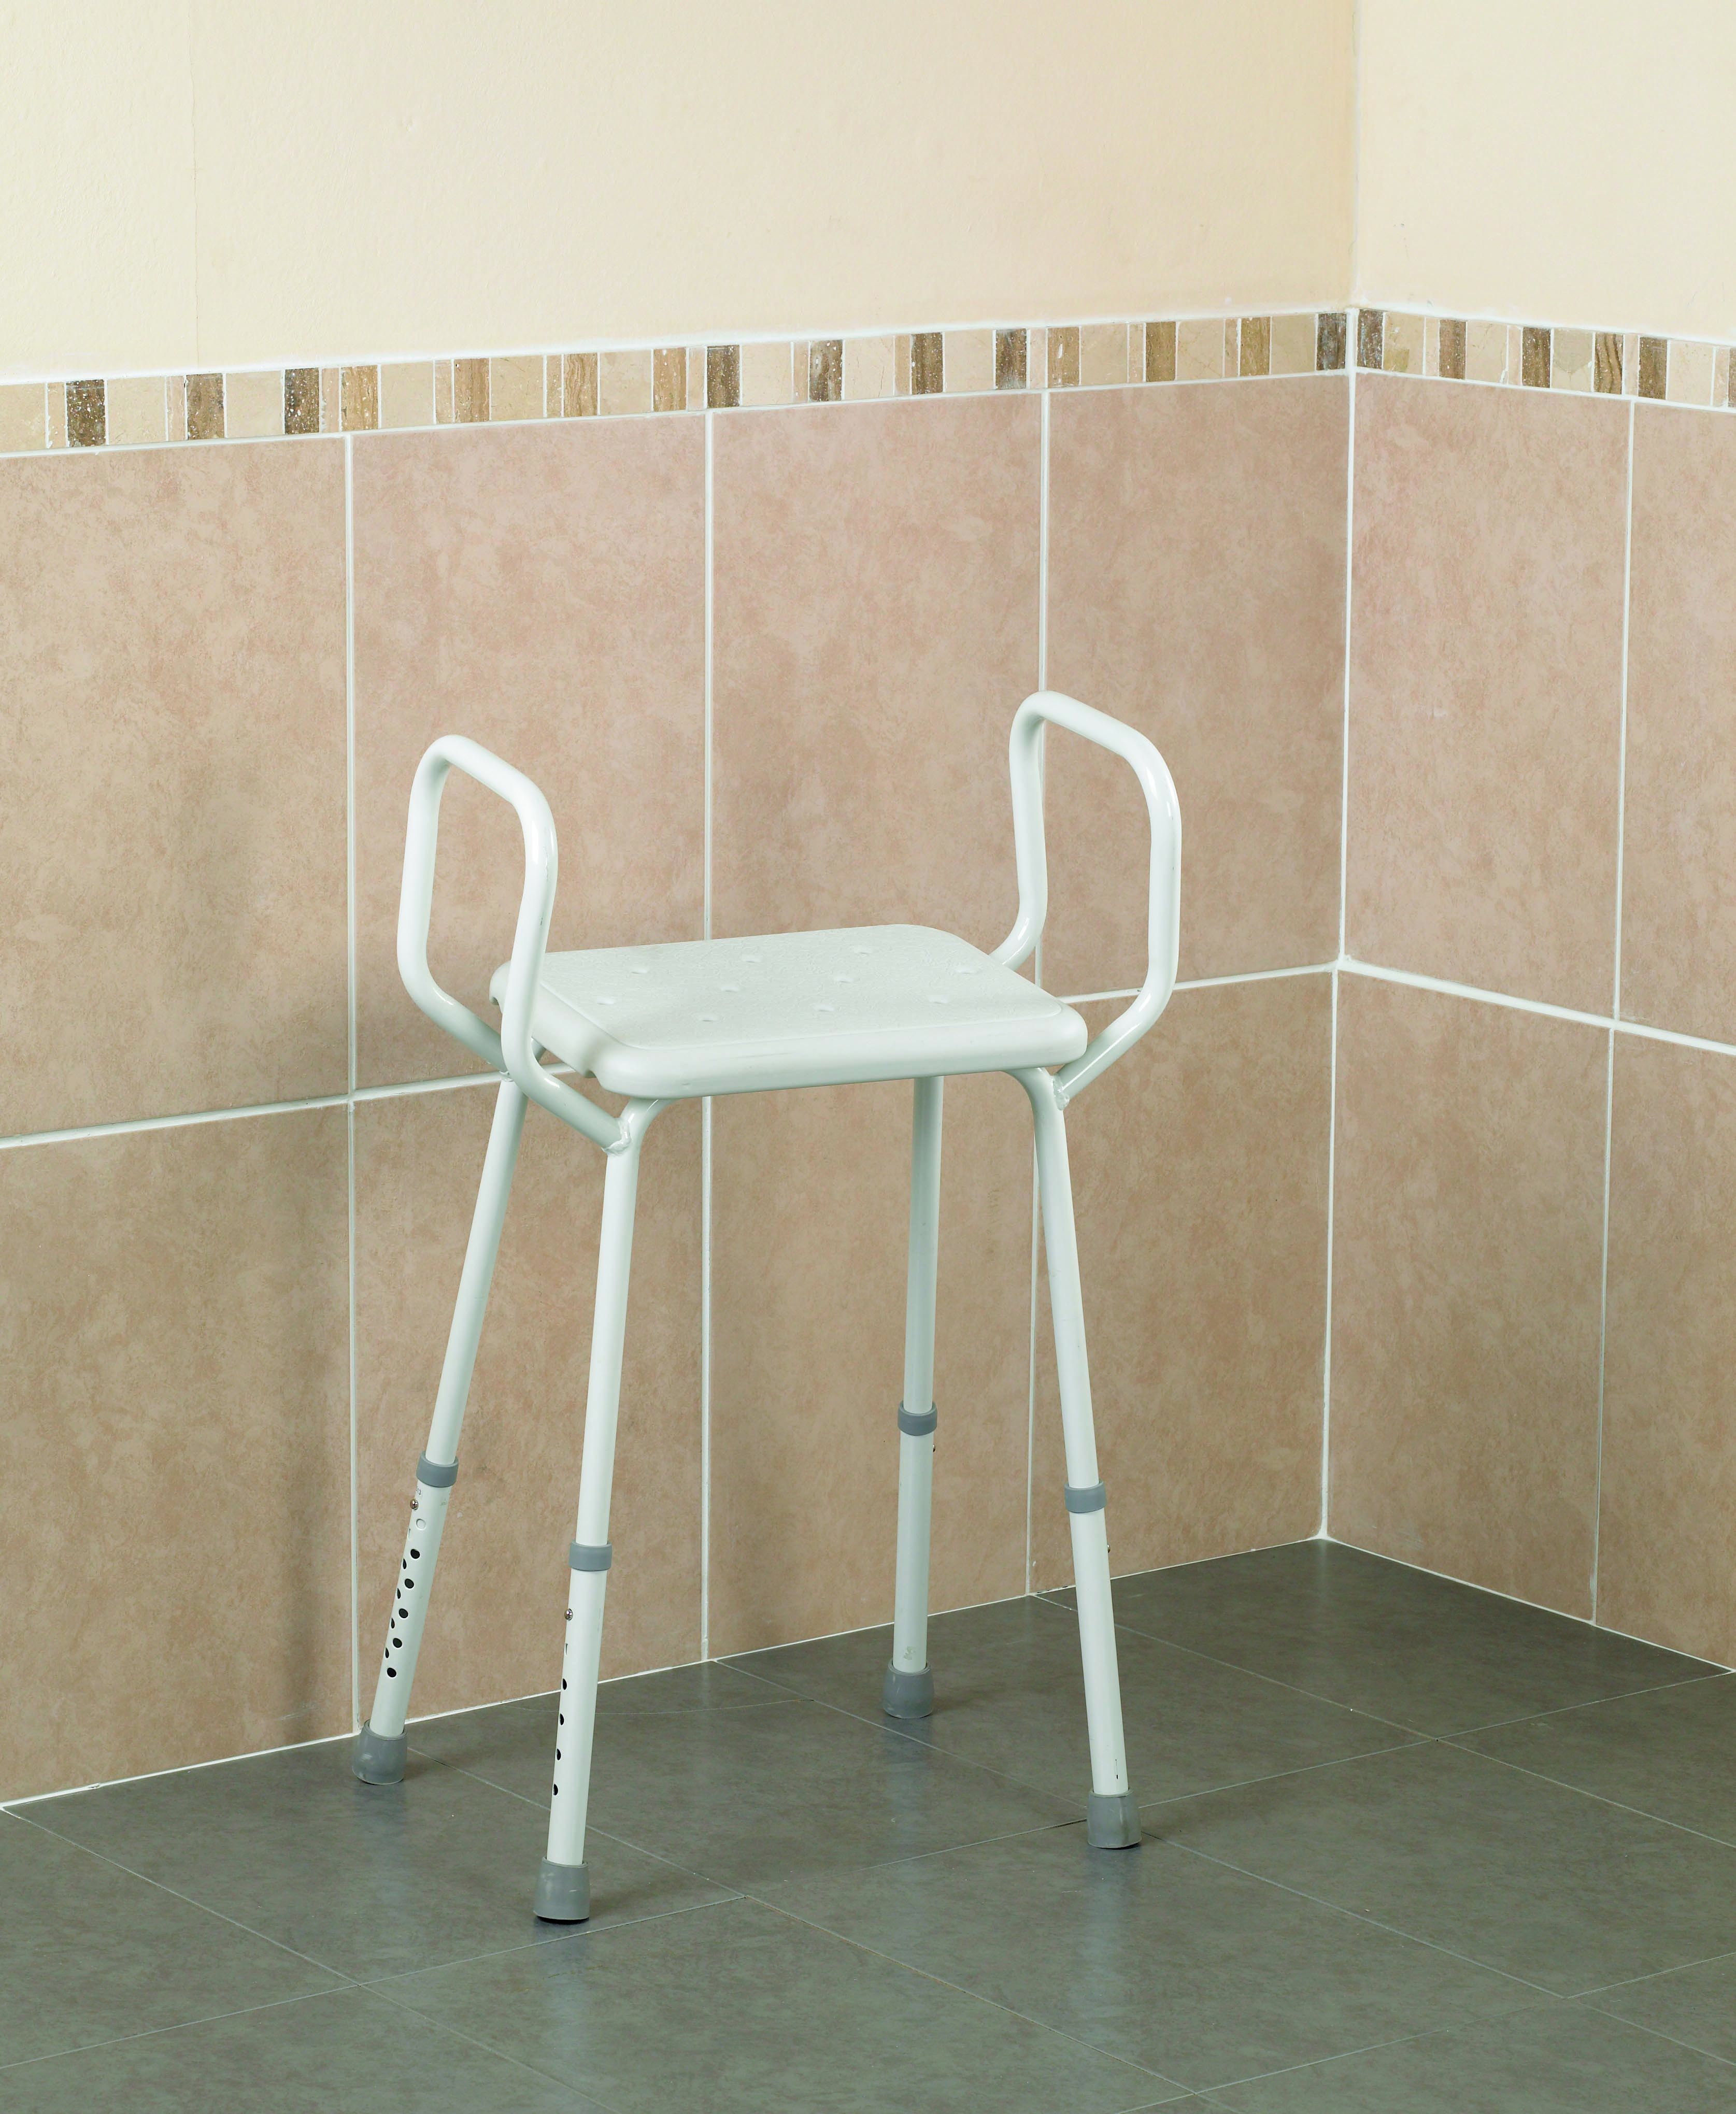 Perching stool and shower stools at true mobility Didcot Oxfordshire